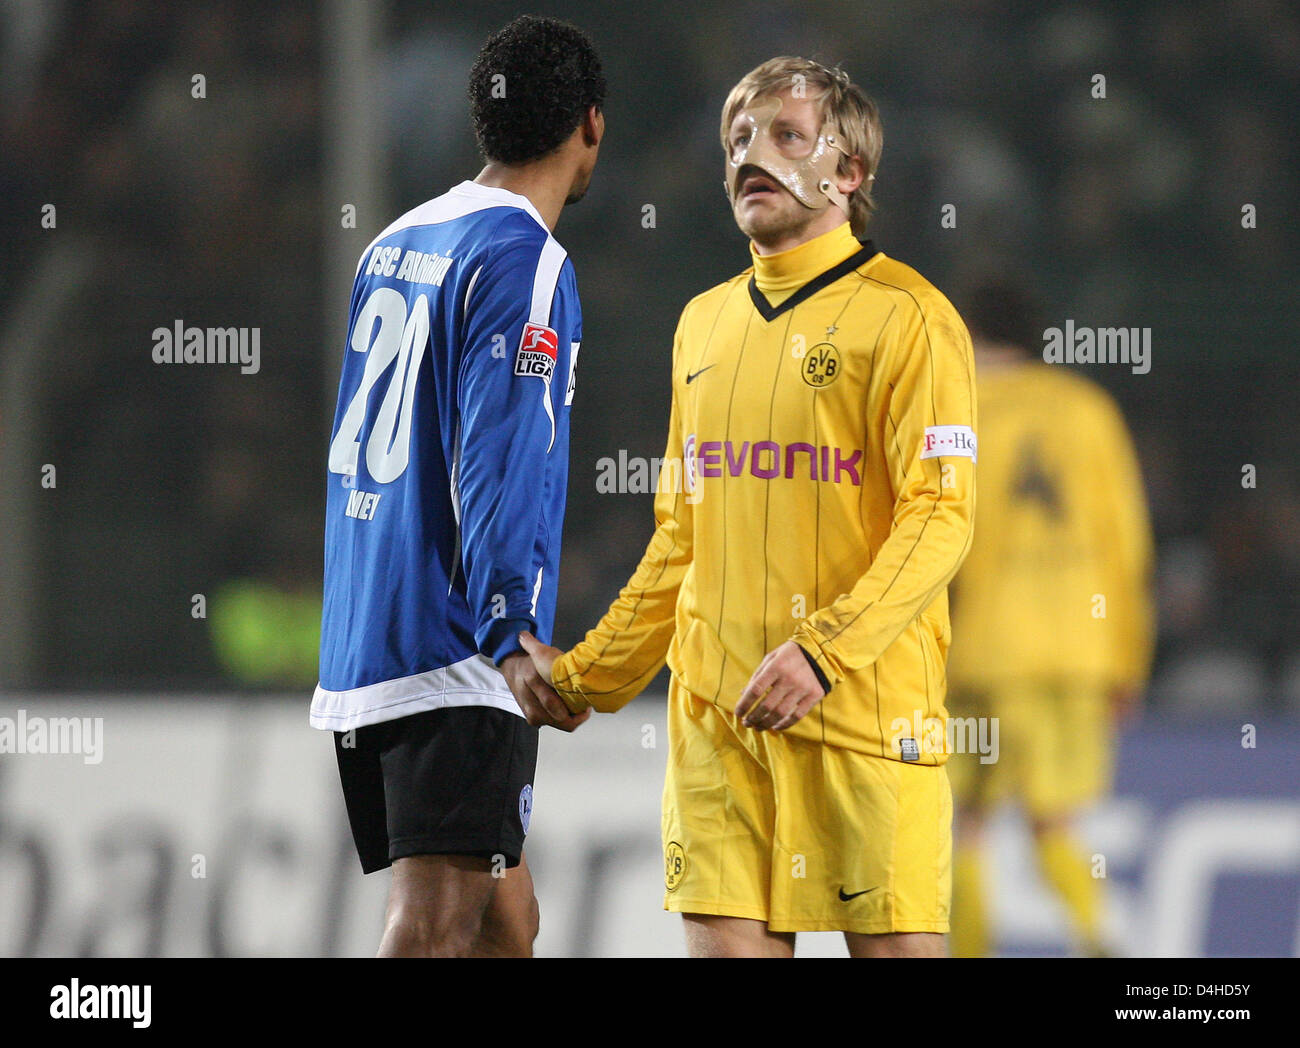 Bielefeld?s Dutch Michael Lamey (L) and Dortmund?s Polish Jakub Blaszczykowski (R) shake hands after the Bundesliga soccer match Arminia Bielefeld vs Borussia Dortmund at SchuecoArena in Bielefeld, Germany, 06 December 2008. The match ended in a 0-0 draw. Photo: FRISO GENTSCH (ATTENTION: BLOCKING PERIOD! The DFL permits the further utilisation of the pictures in IPTV, mobile servic Stock Photo